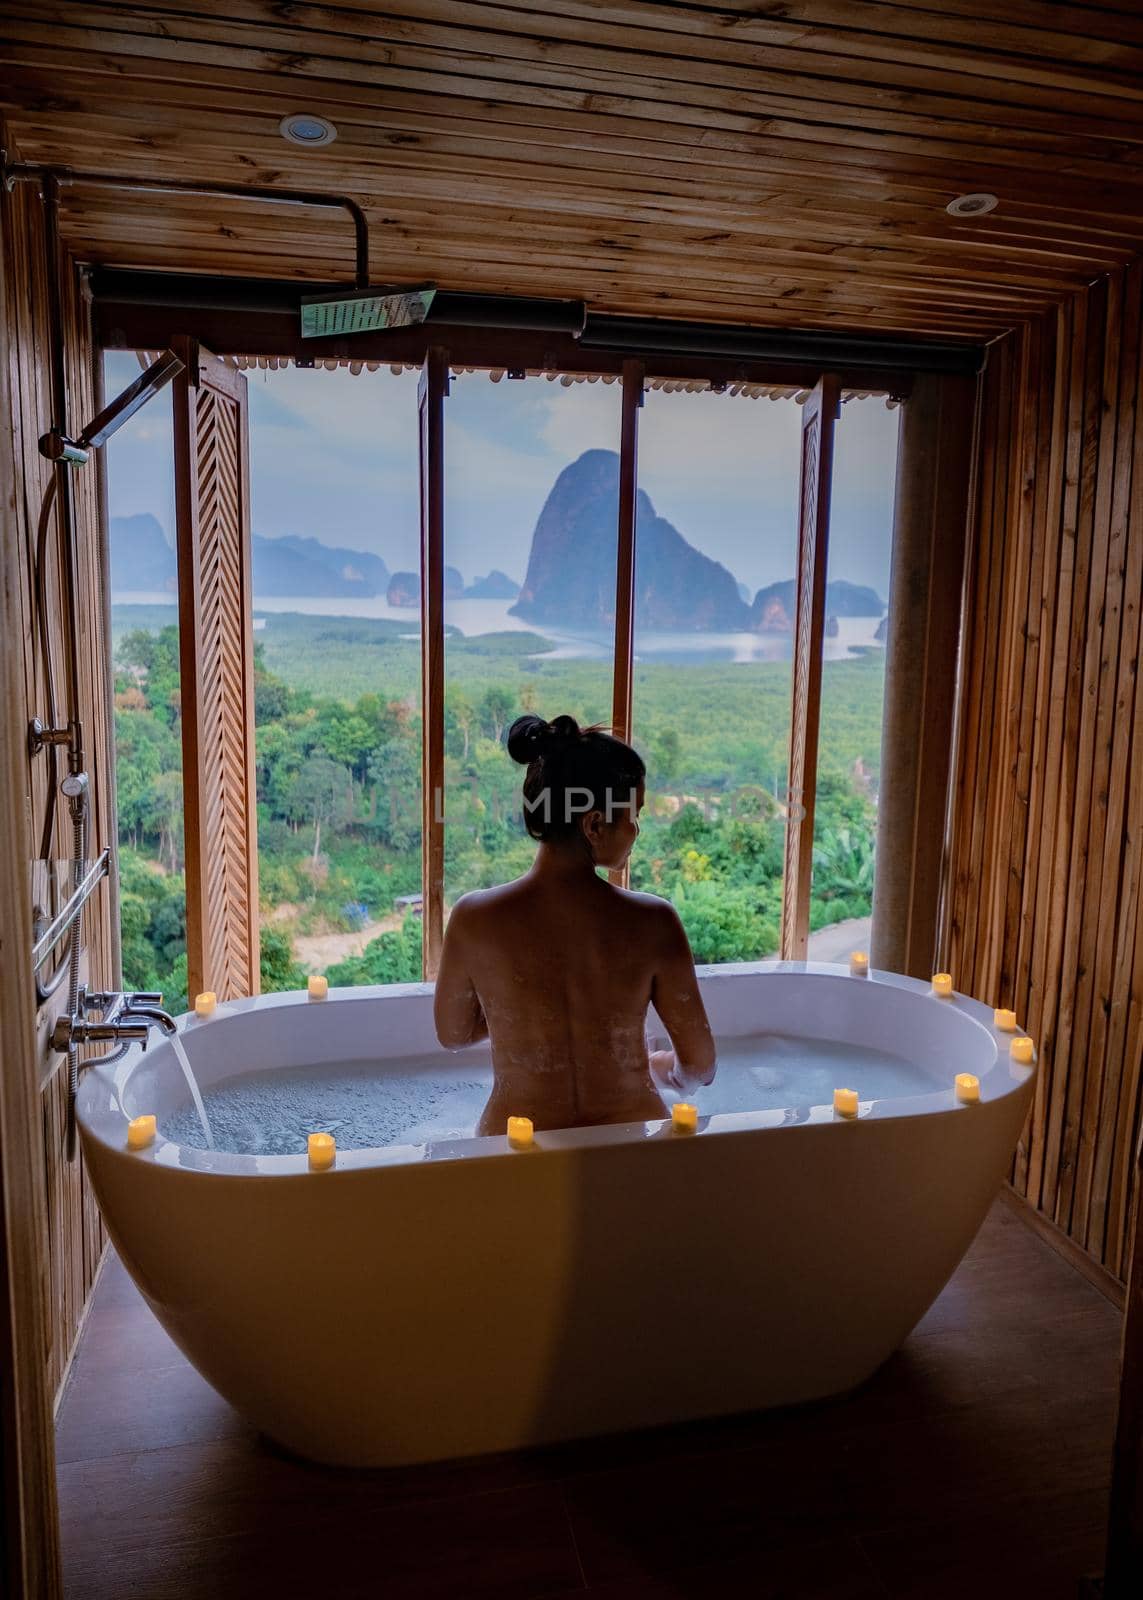 woman in bath tub looking out window of bathroom, asian woman mid age,Romantic moments in the bathroom on vacation at Phangga Thailand. woman on vacation Thailand Asia Phangnga bay